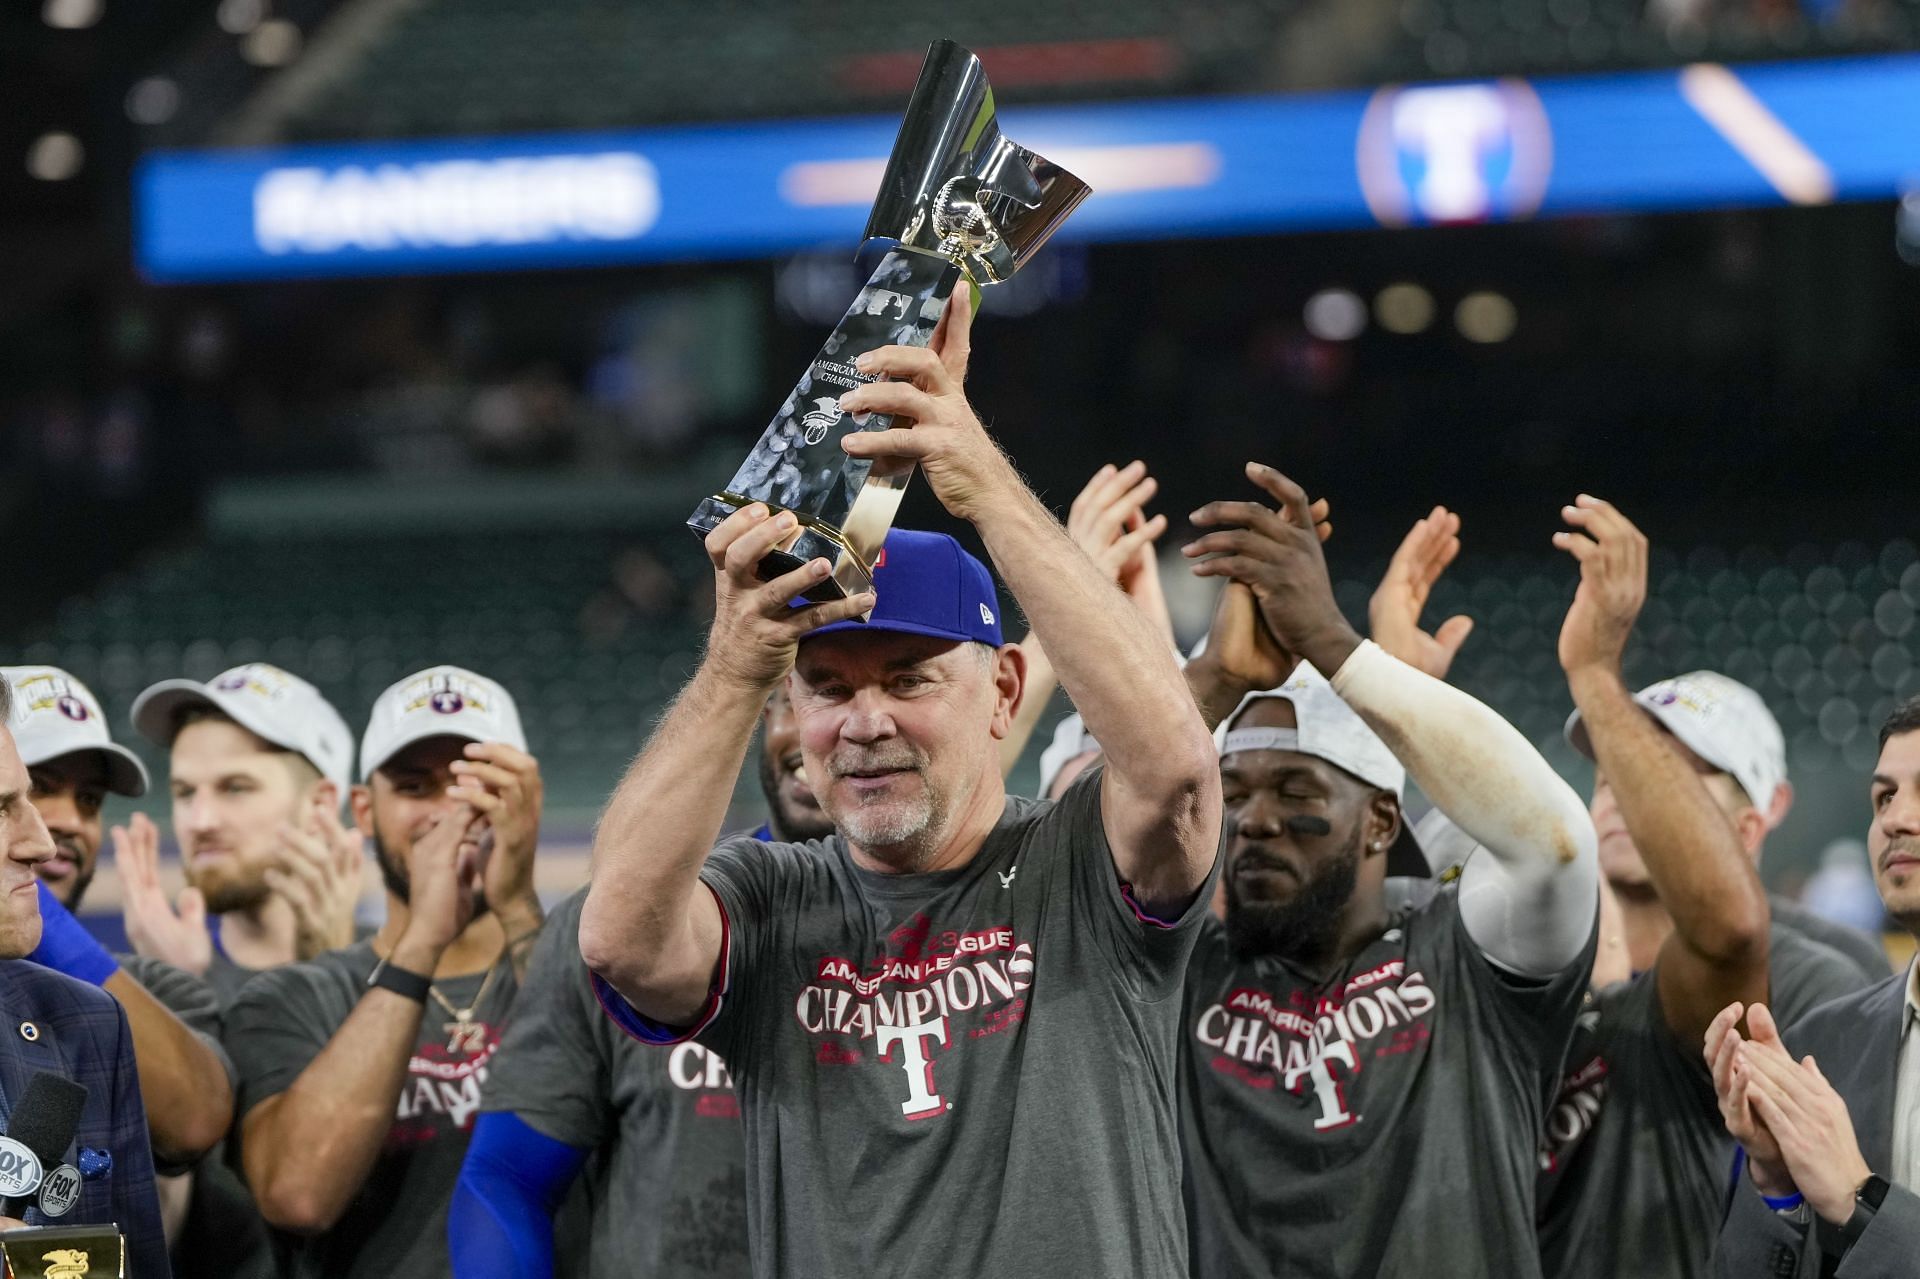 Bruce Bochy lauded the Rangers after ALCS win